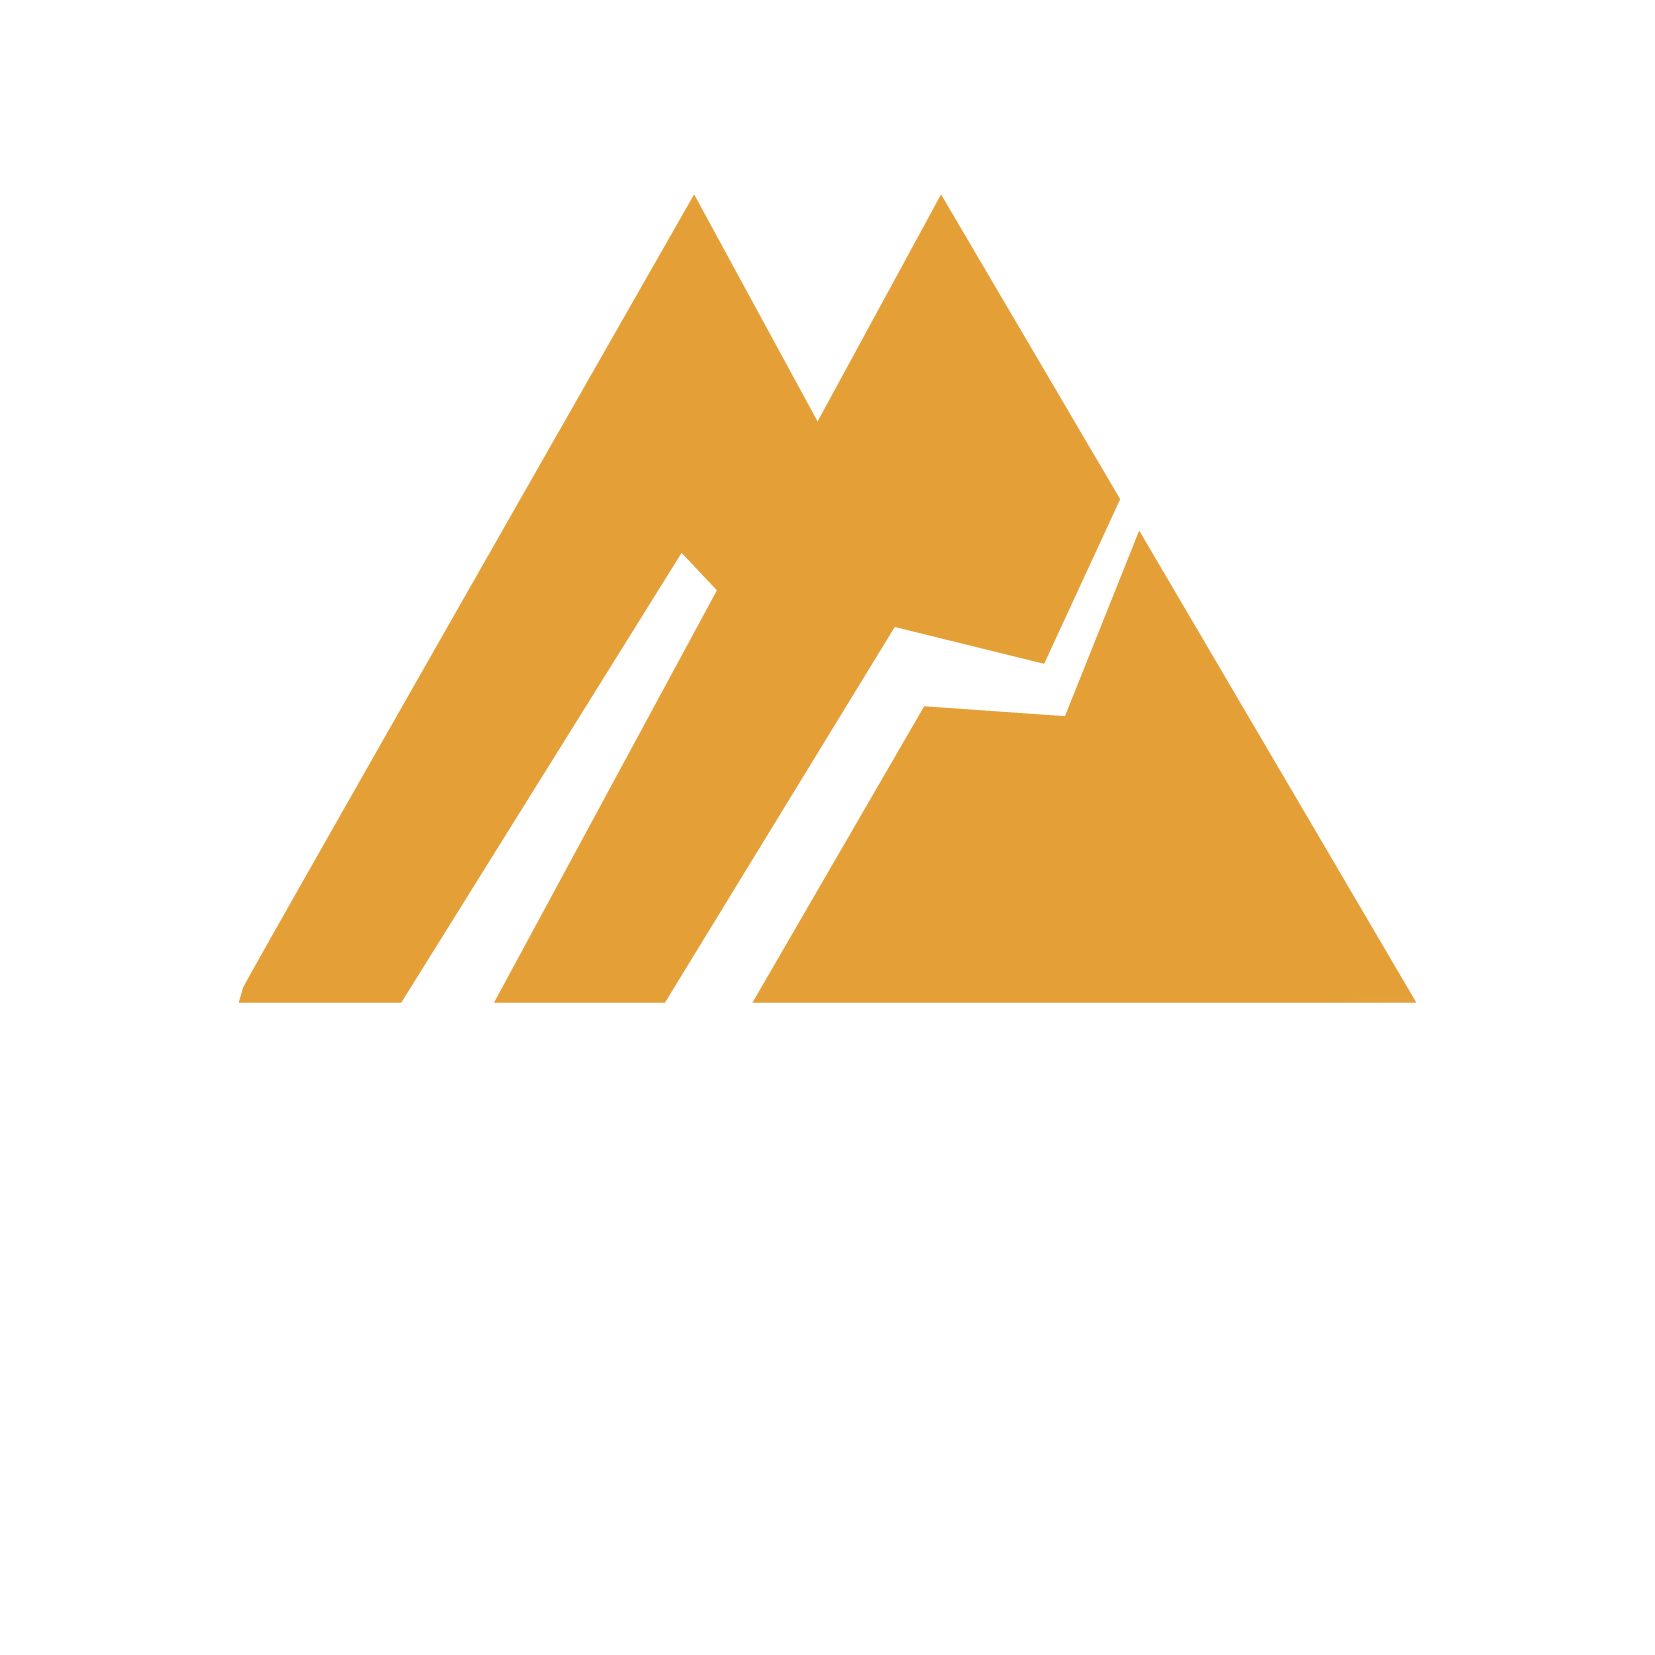 SBFS Group